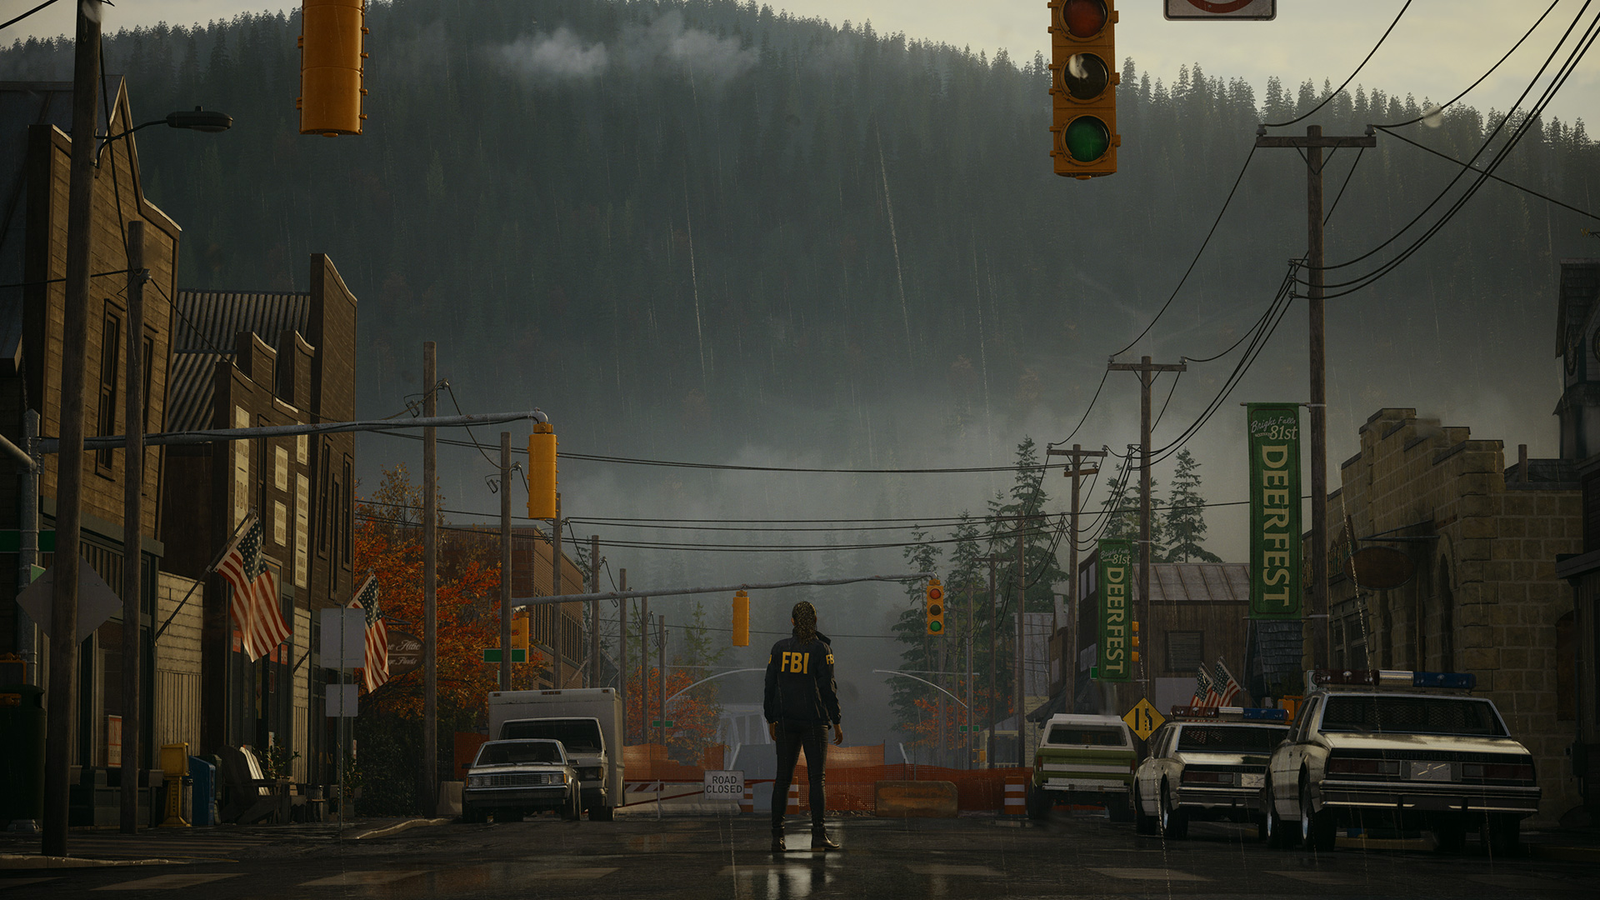 Is Alan Wake 2 Digital Only?